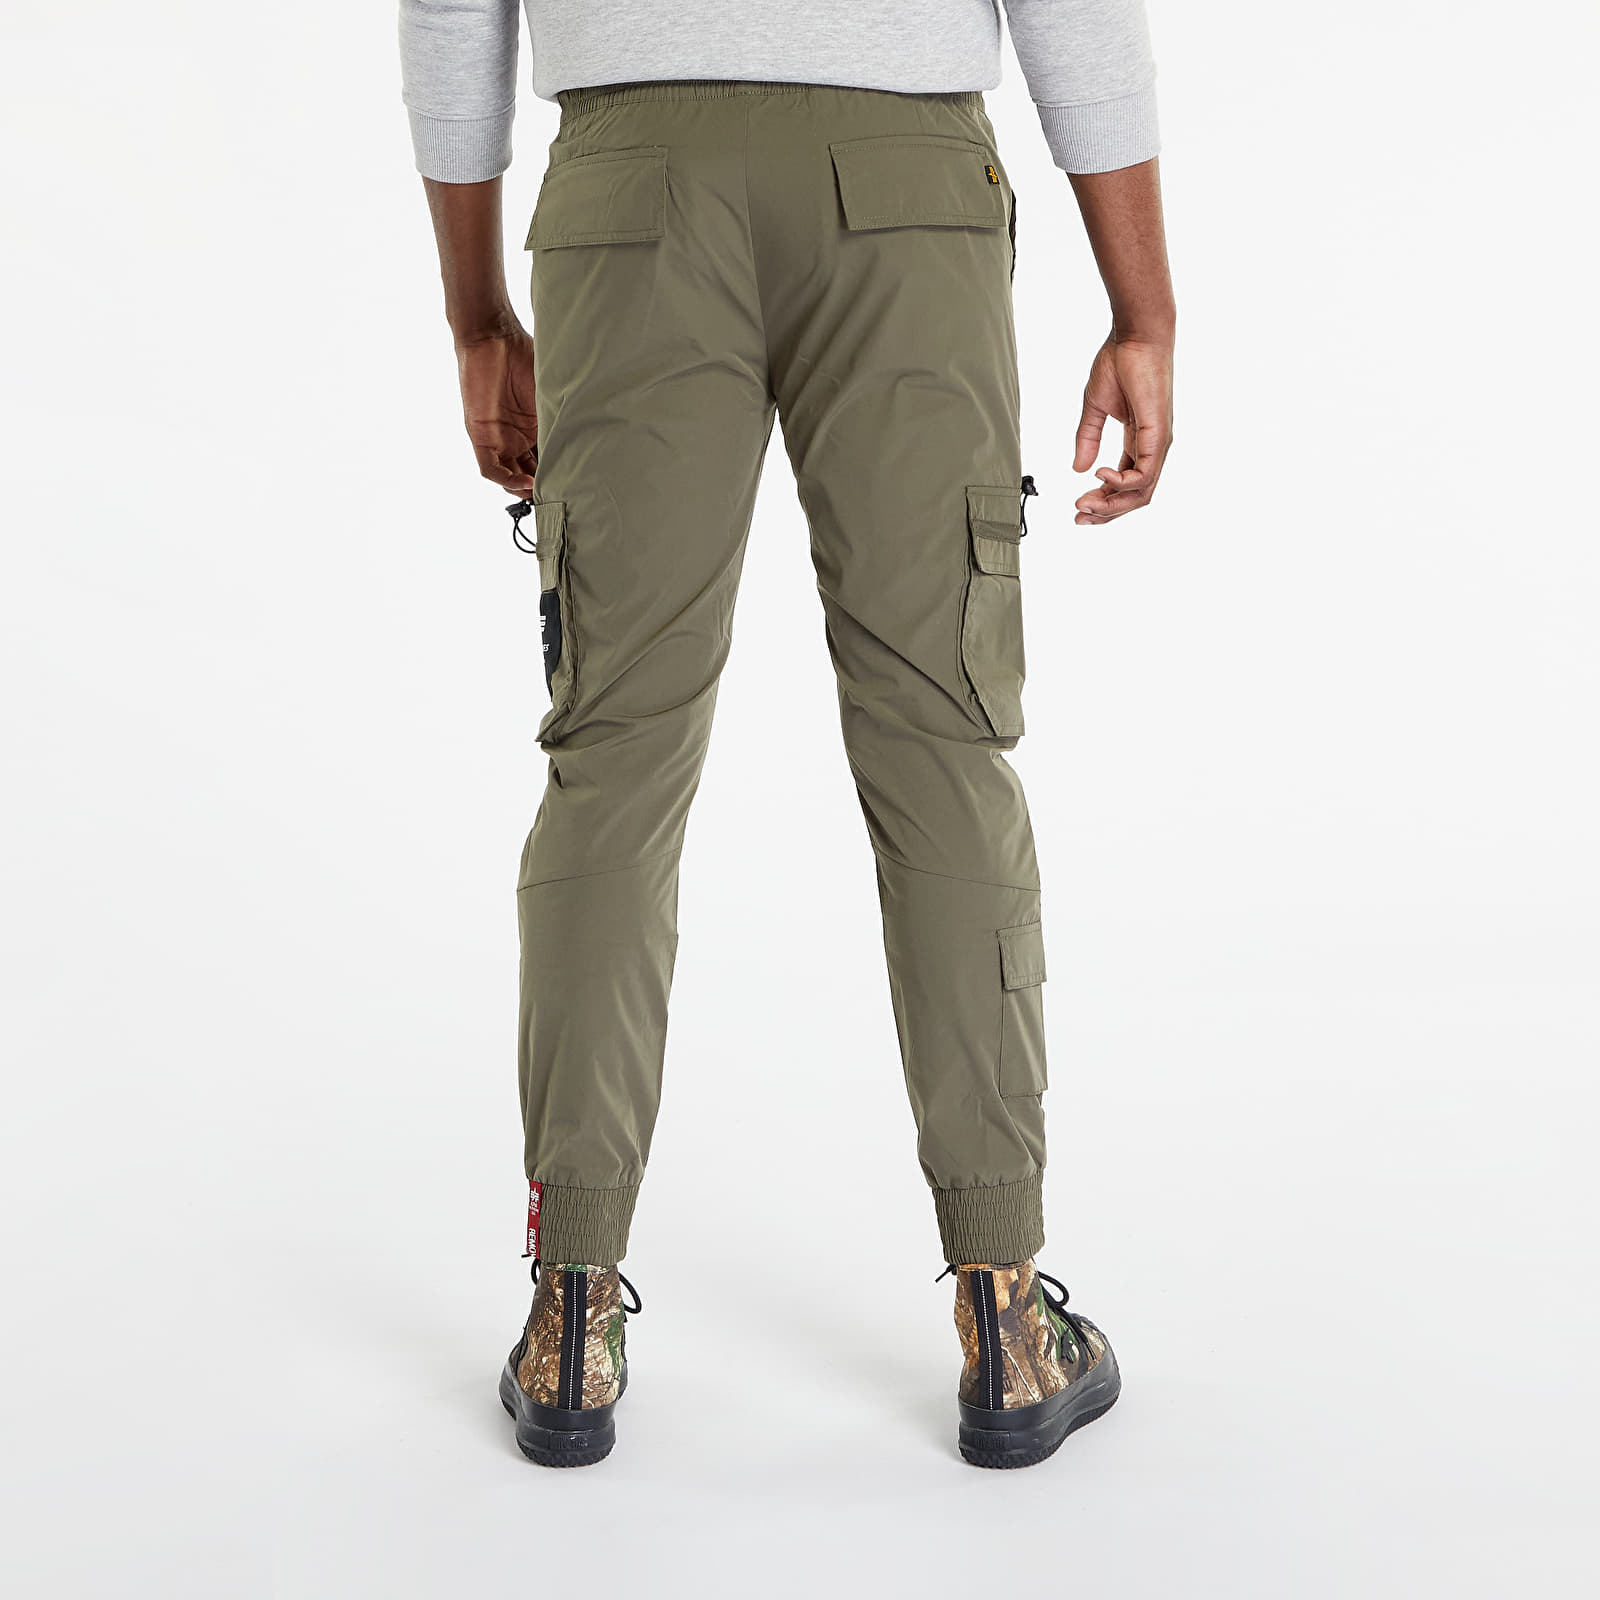 jeans Queens Tactical Jogger Pants Alpha Industries Olive Dark and Pant |